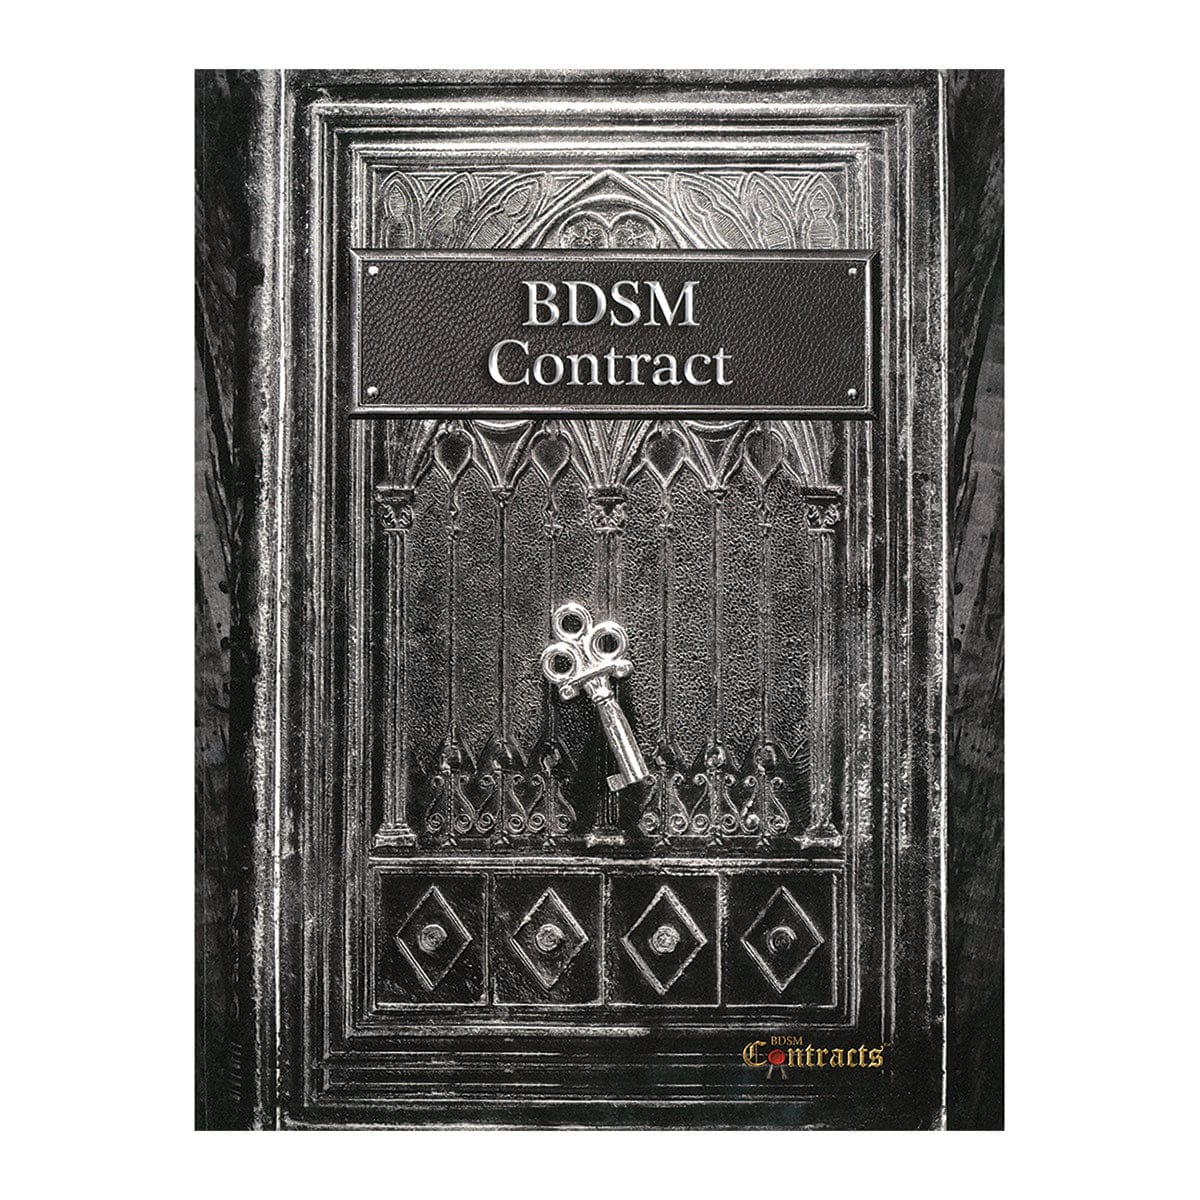 BDSM Contract by BDSMContracts - rolik